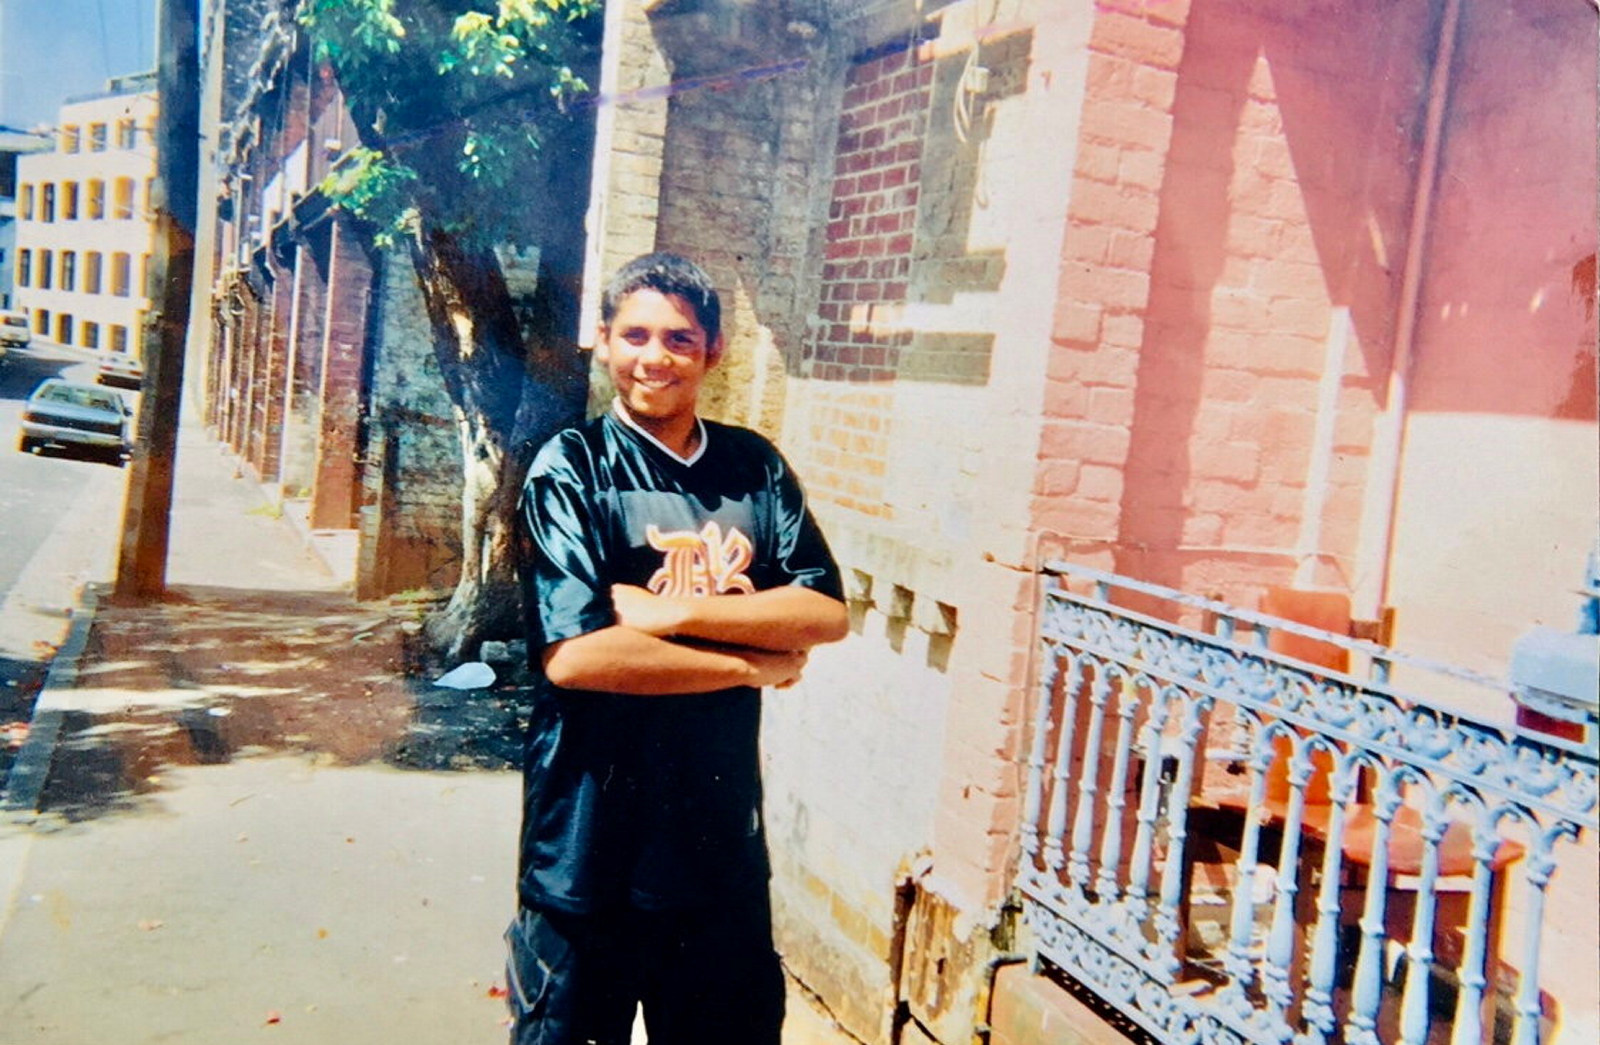 Dennis Golding outside his grandmother's house on Eveleigh Street, Redfern, 2003. Reproduction of photograph by Felicity Weatherall.